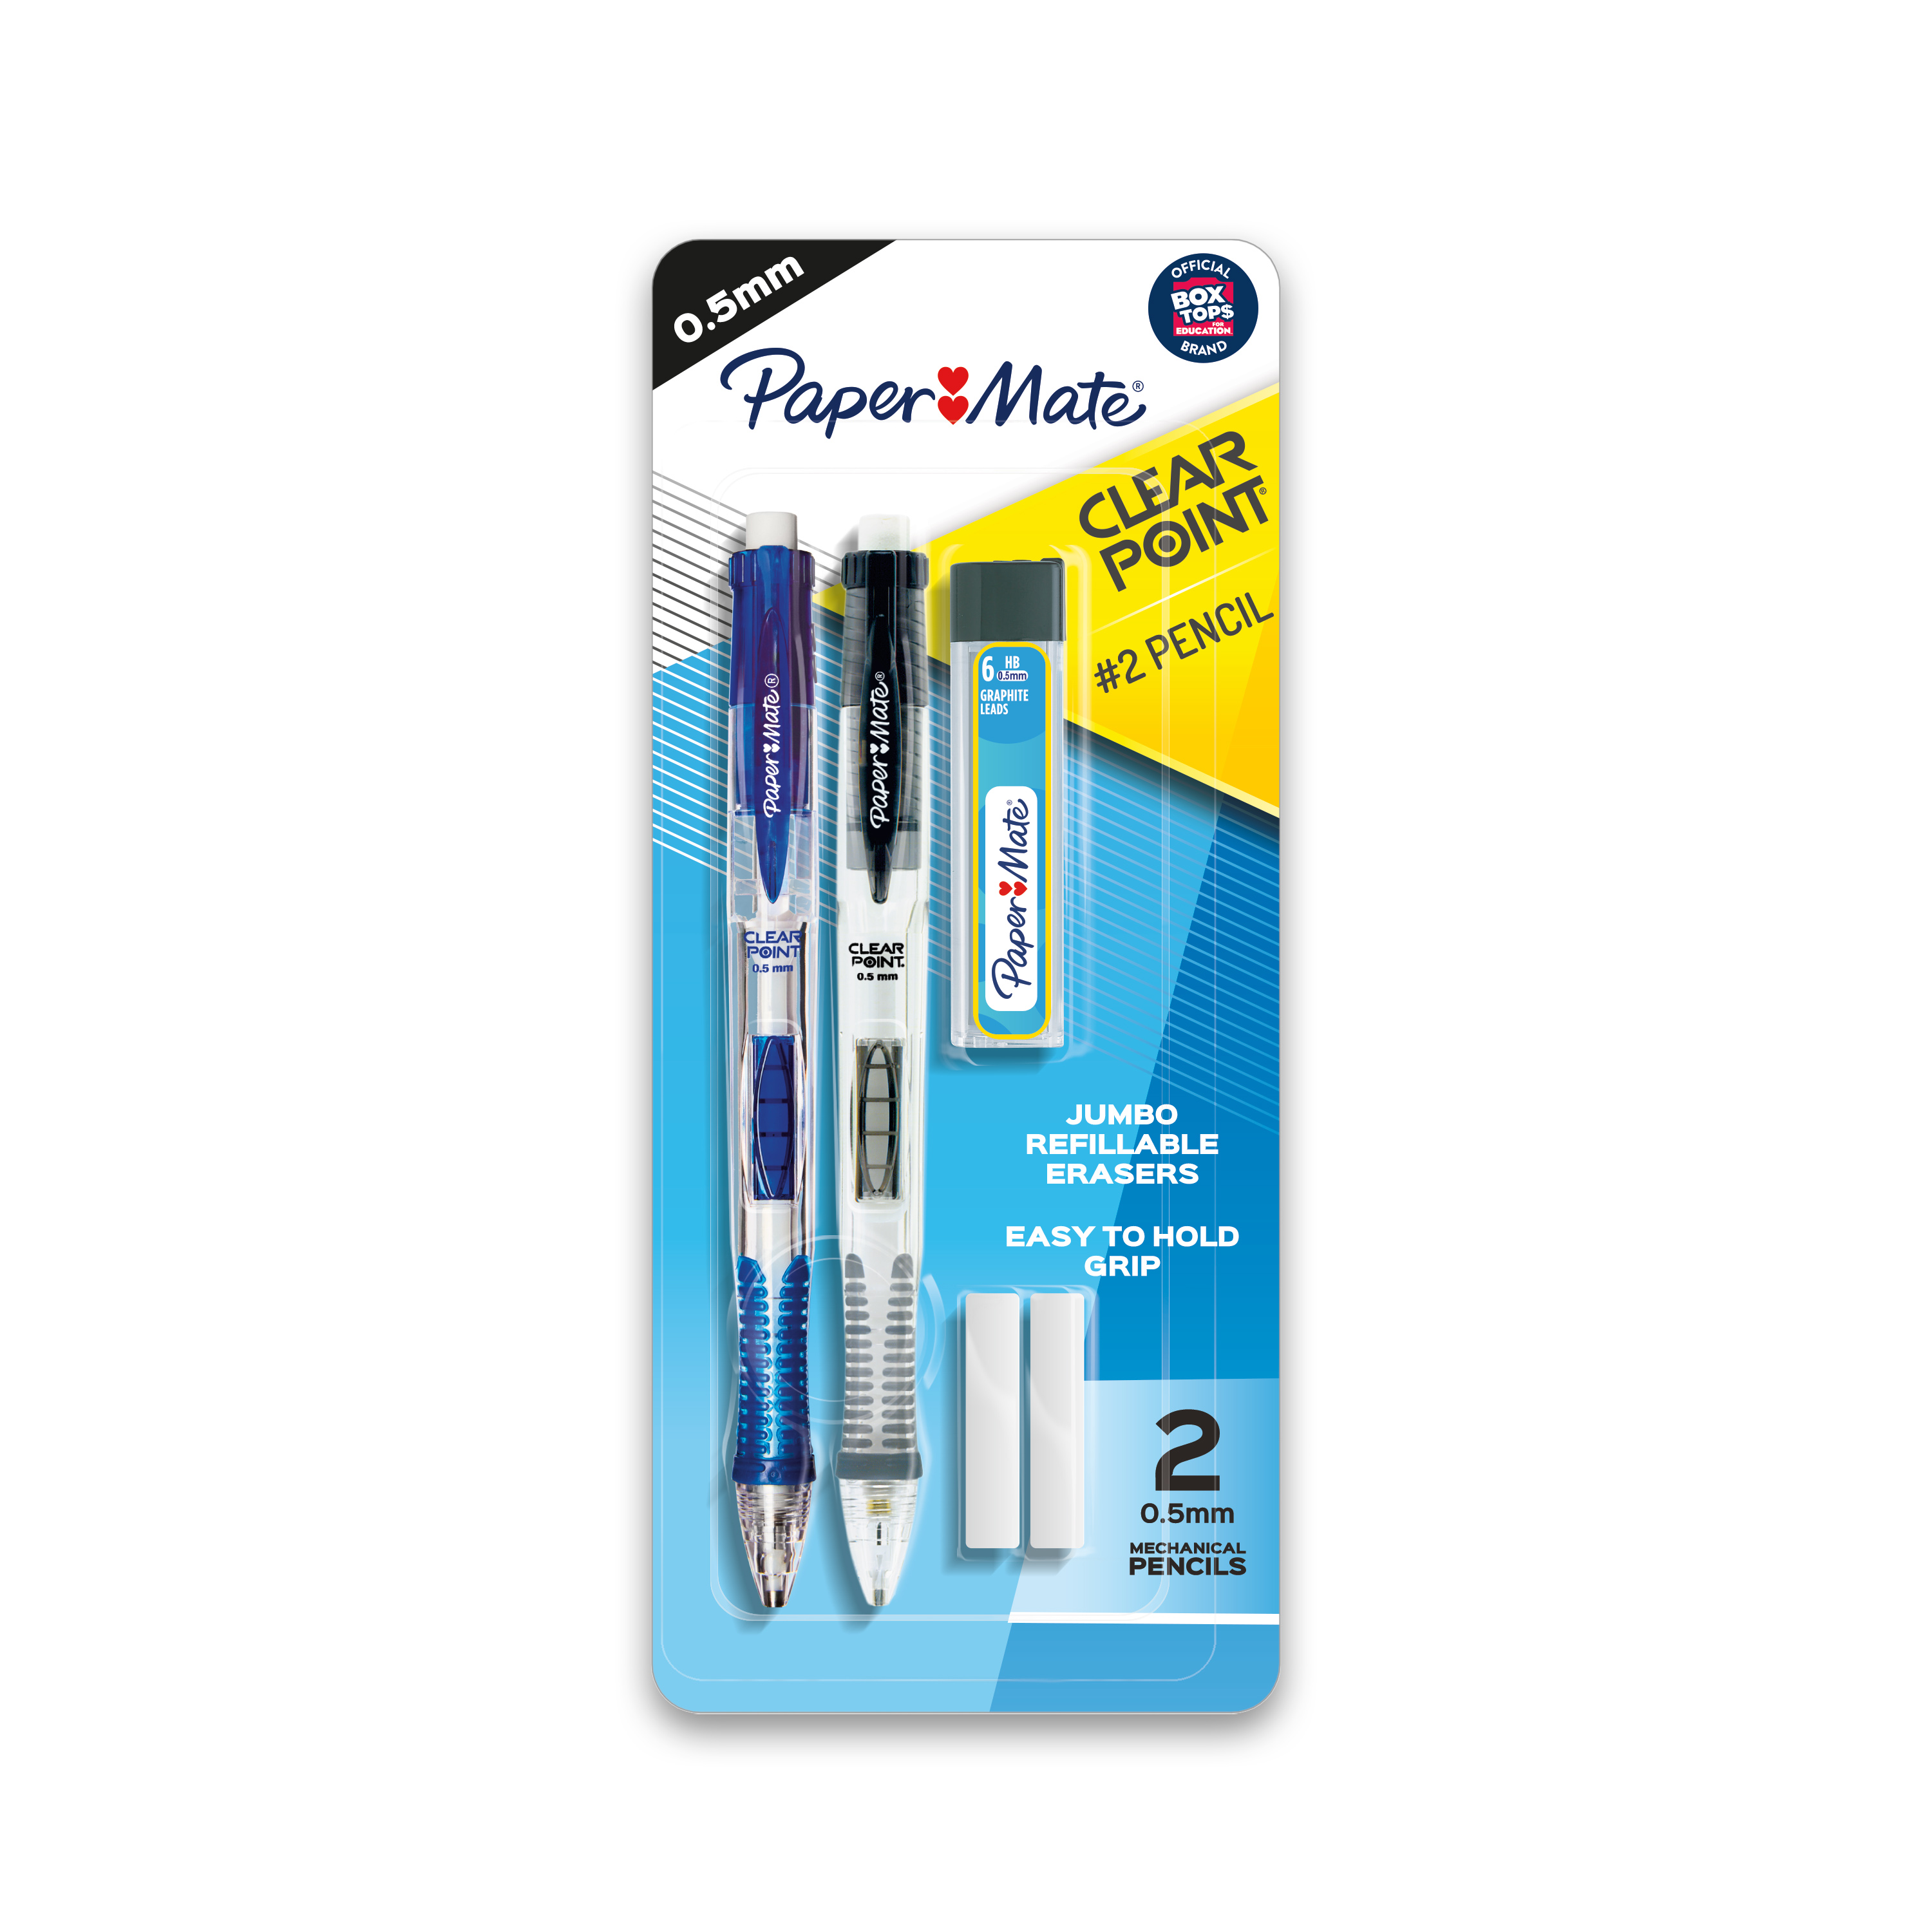 Paper Mate Clearpoint Mechanical Pencil Starter Set, 0.5 mm, 2 Pencils, 1 Lead Refill Set, 2 Erasers - image 1 of 8